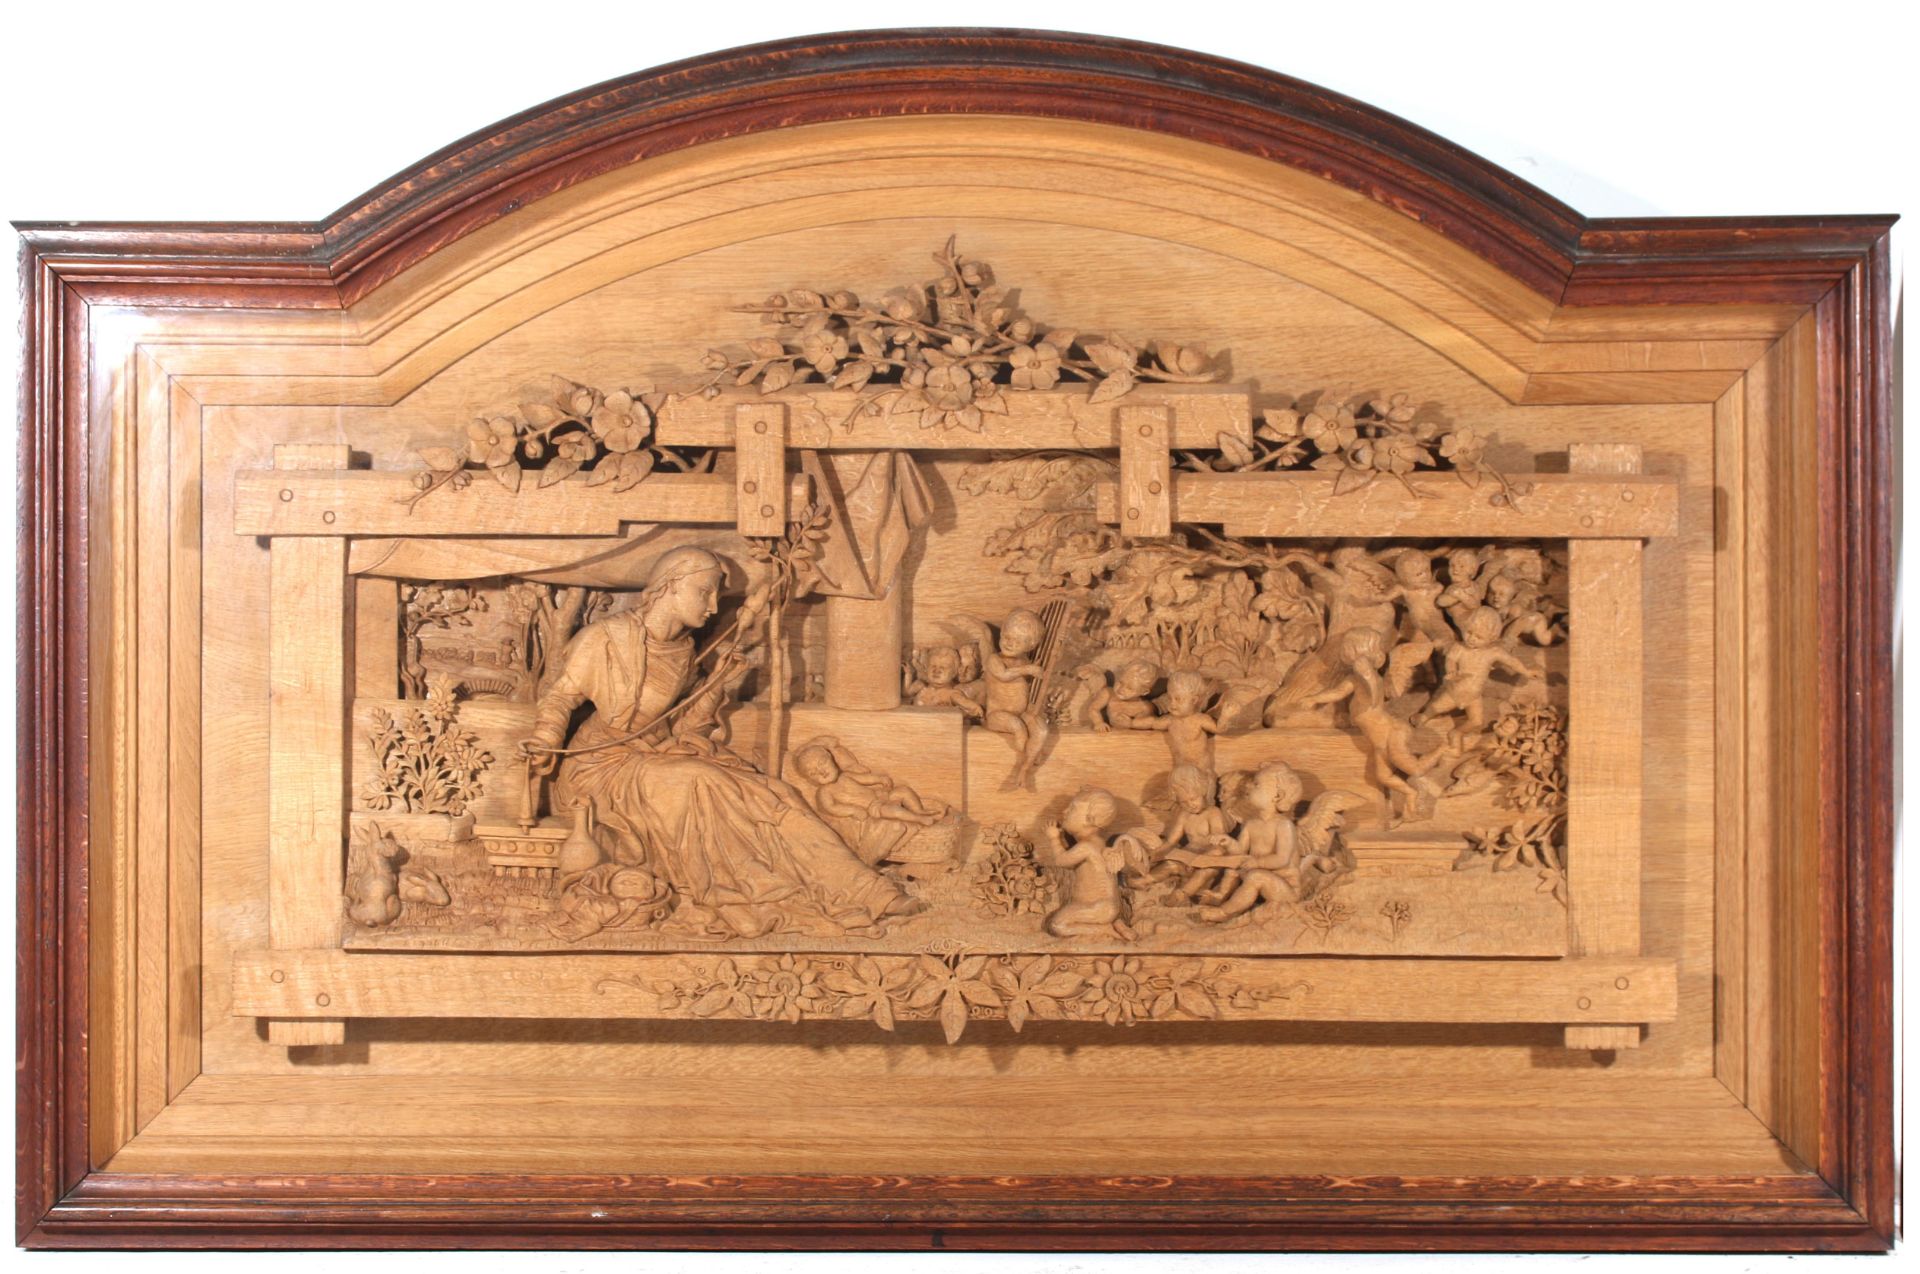 A carved wooden relief with scene of a spinster with children and putti, Germany, late 19th